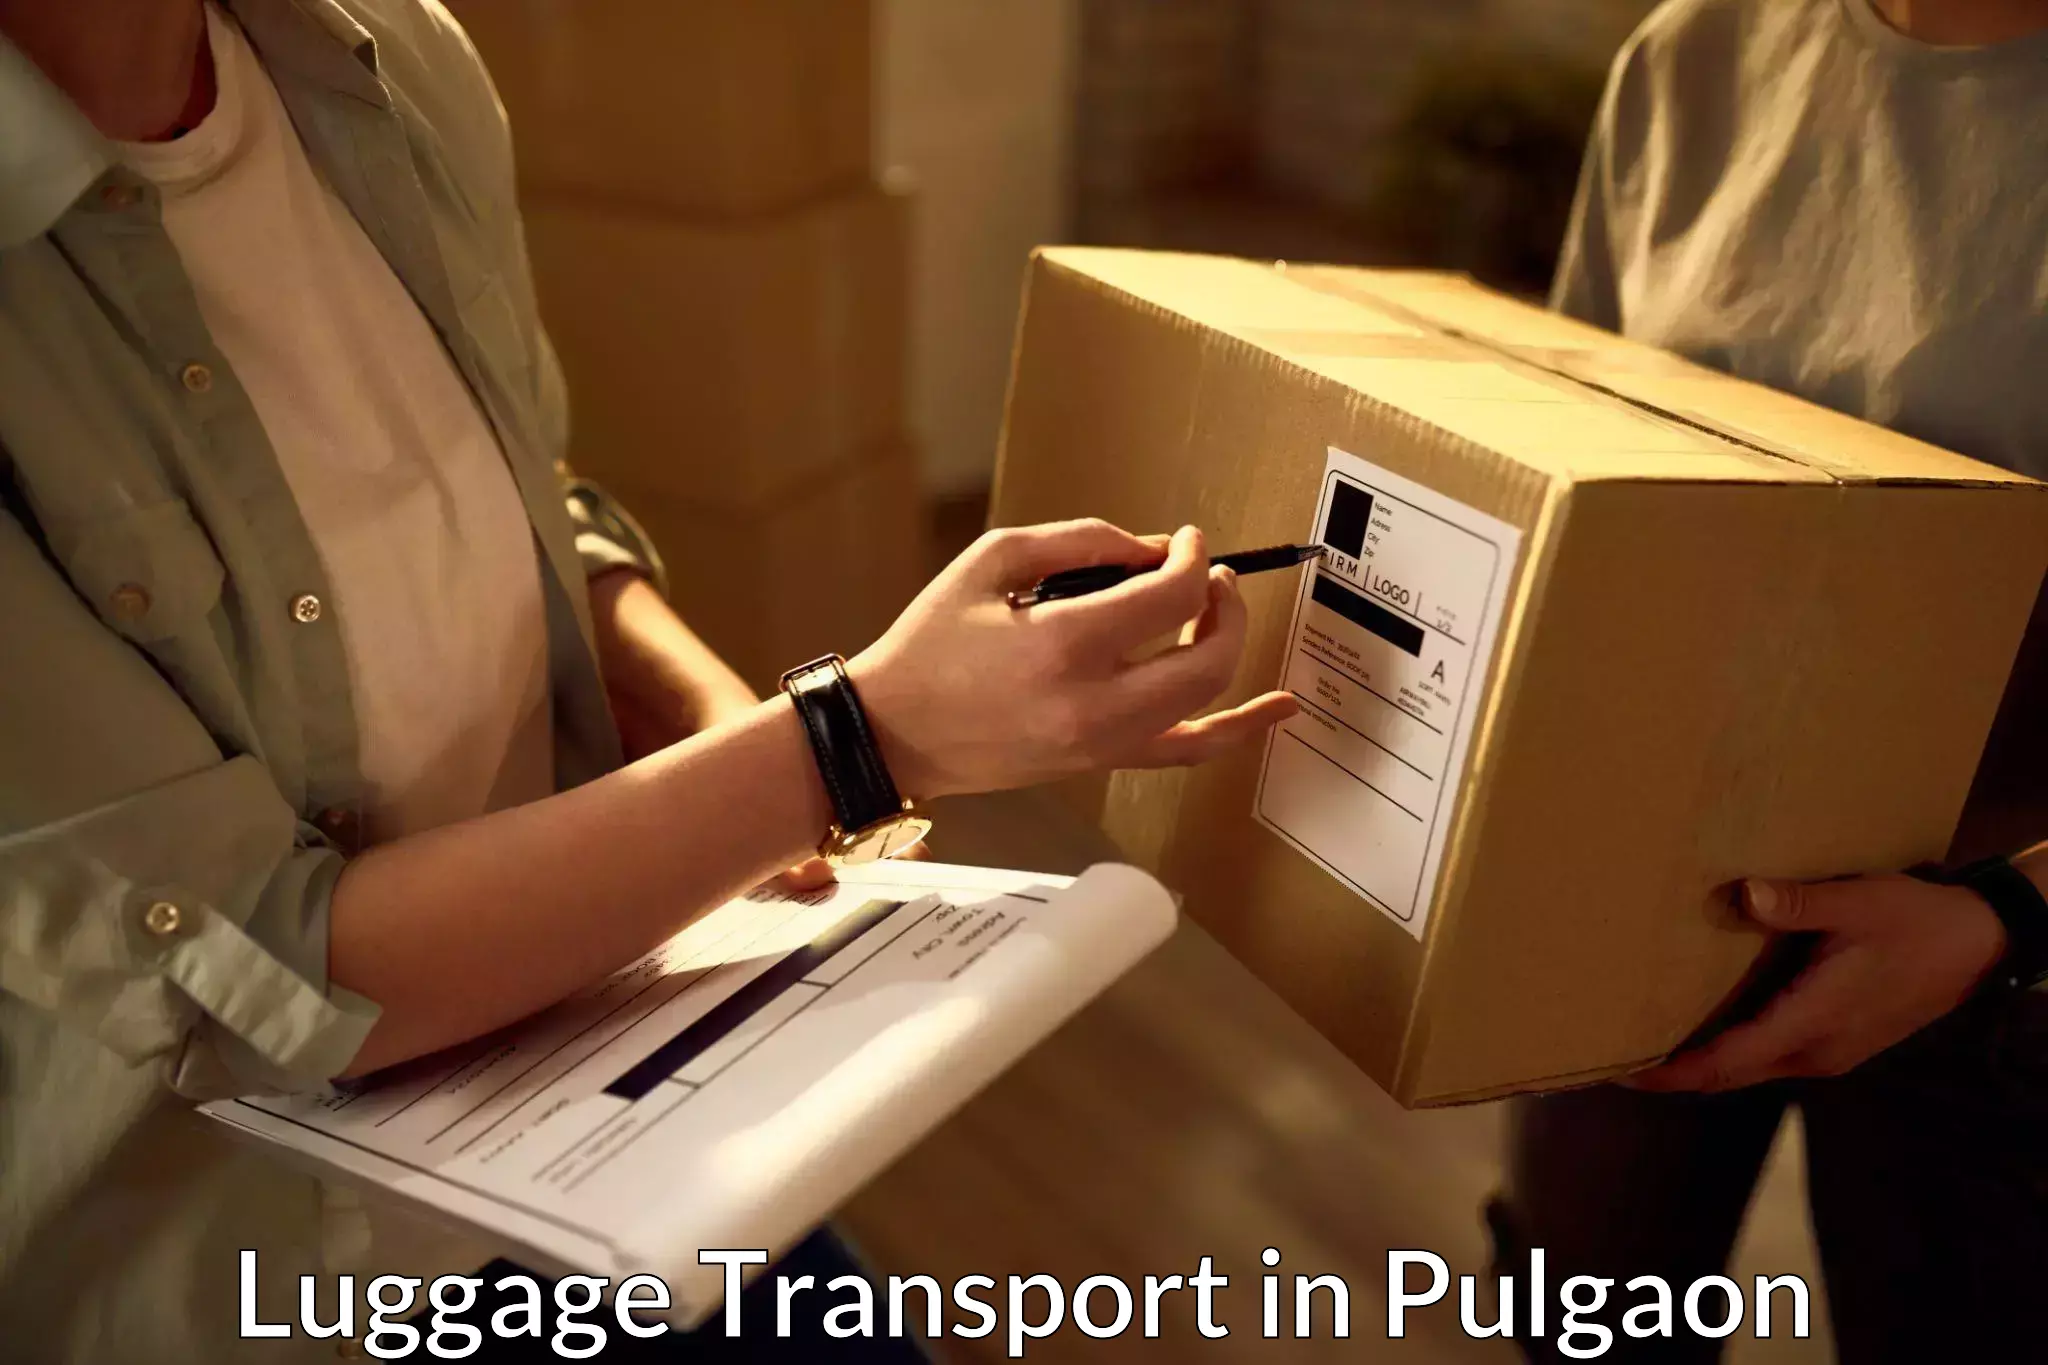 Luggage transport rates in Pulgaon